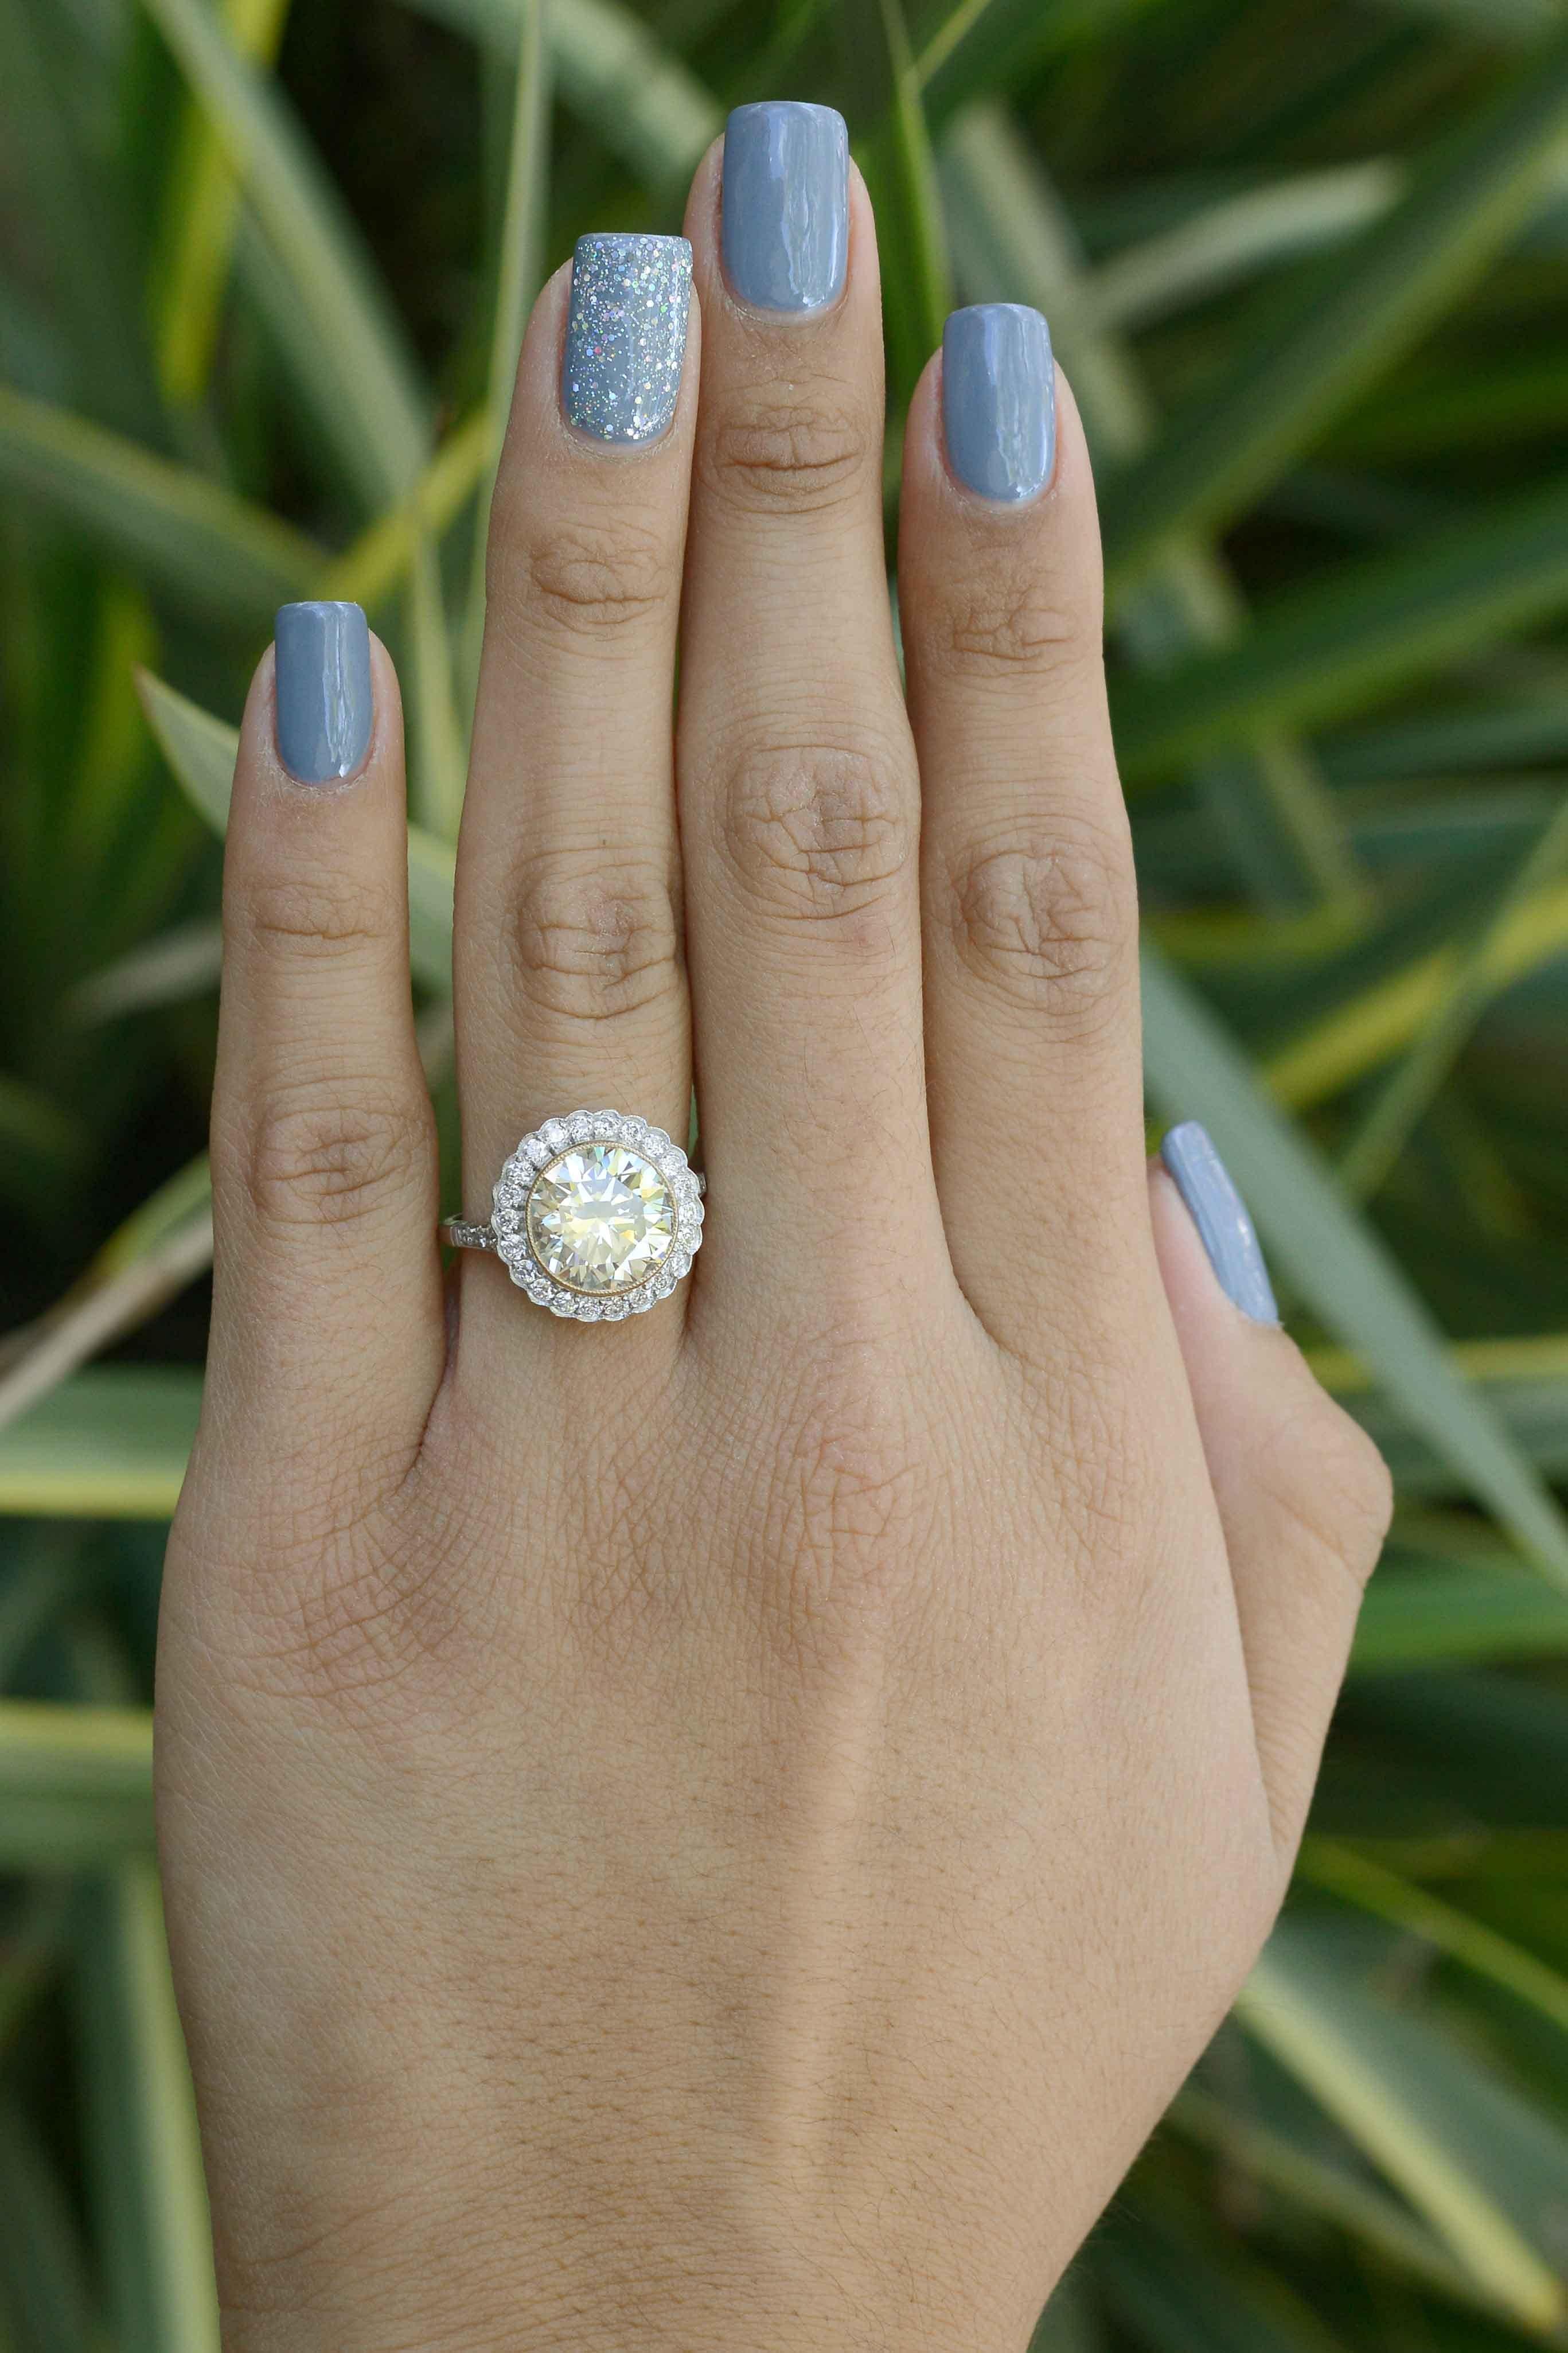 The Burlingame 4.46 carat round yellow diamond engagement ring is a huge, accented solitaire target style design. The natural canary yellow color contrasts nicely against a scalloped halo of sparkling white diamonds which adds to the allure of this